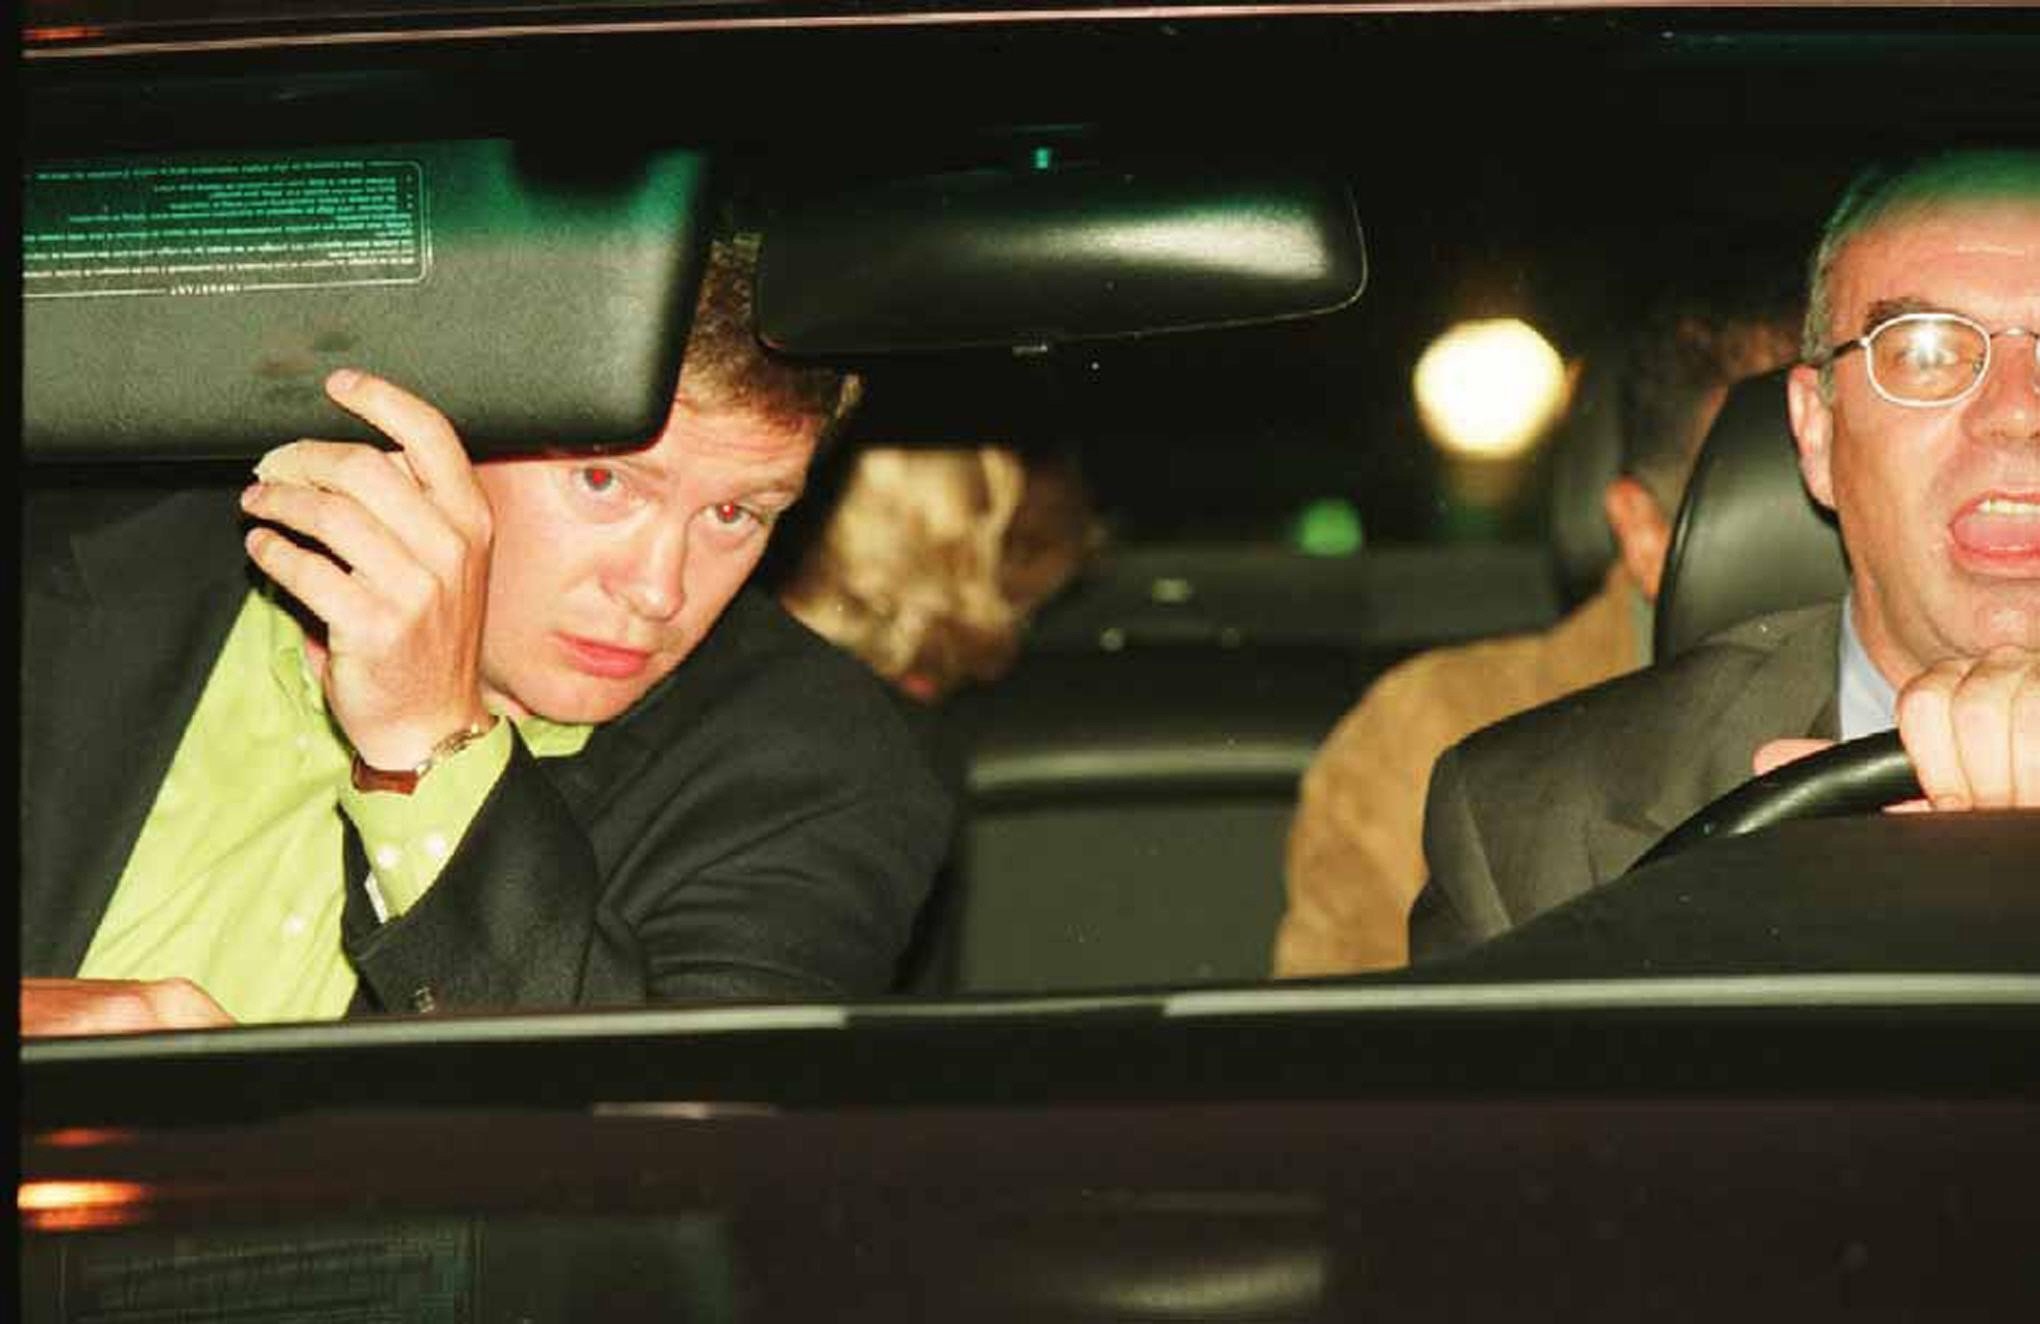 Bodyguard Trevor Rees-Jones and driver Henri Paul in car with Princess Diana and Dodi Al Fayed in the backseat